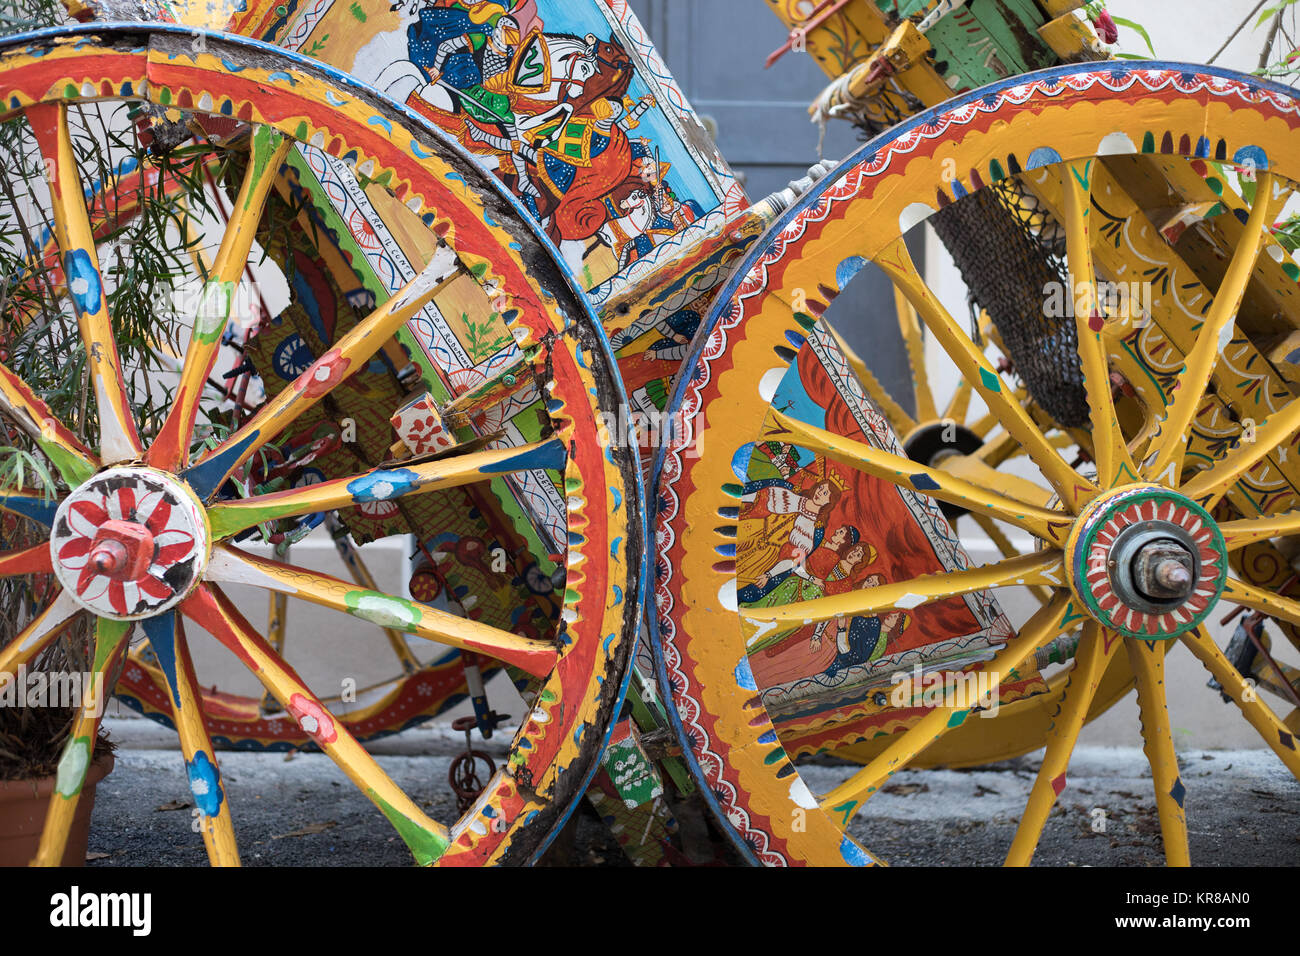 Weels of wood cart, painted with multi colored scenes of typical farmer life and allegoric scenes, as a very typical object fron Sicilian traditions. Stock Photo